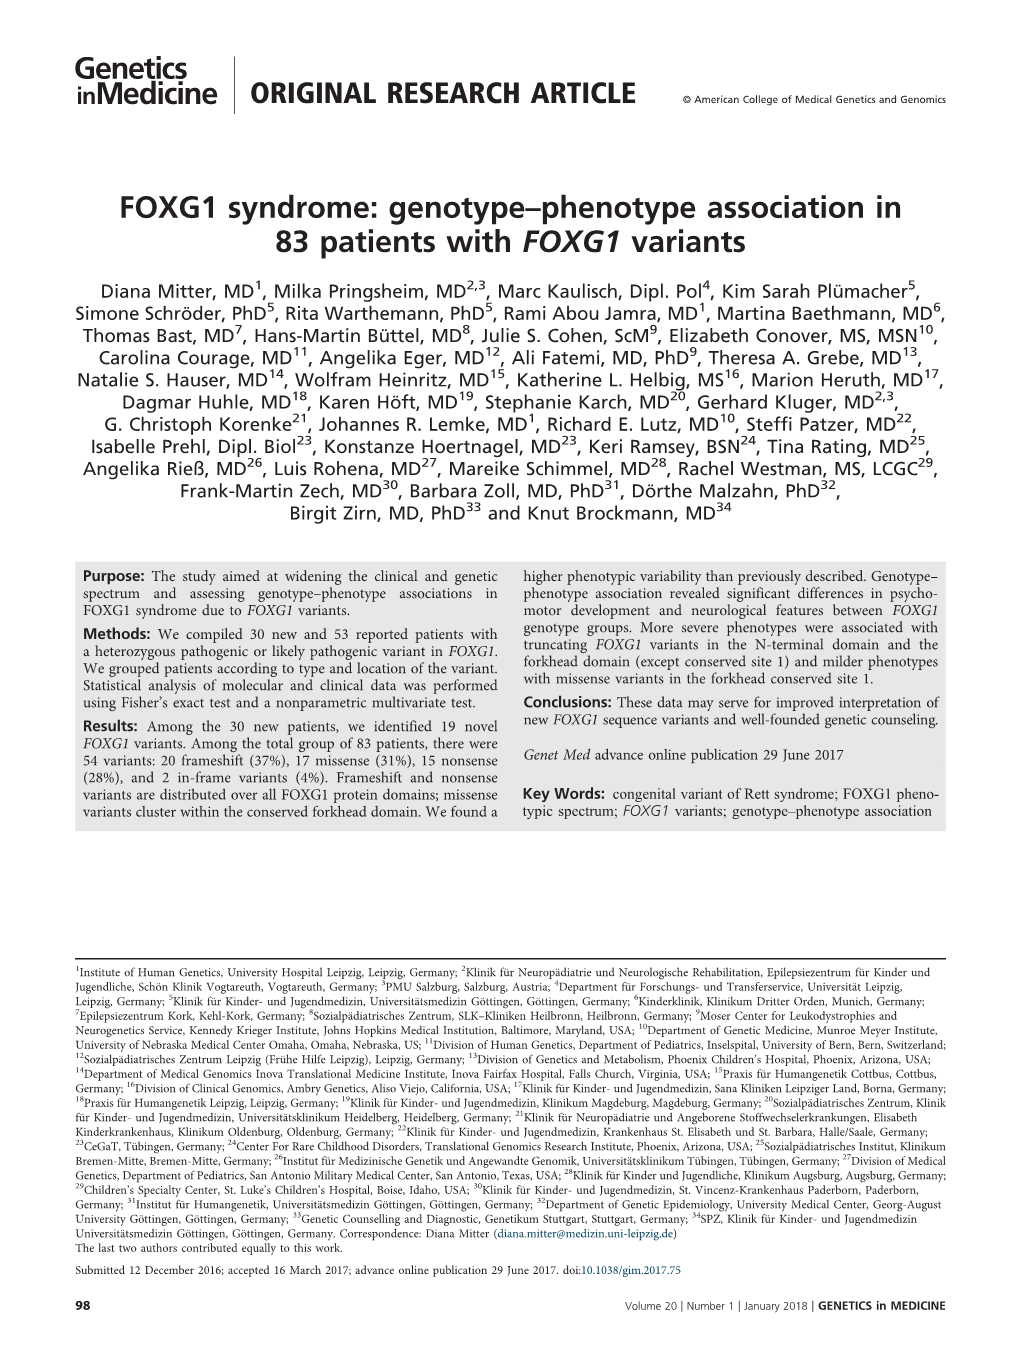 FOXG1 Syndrome: Genotype–Phenotype Association in 83 Patients with FOXG1 Variants